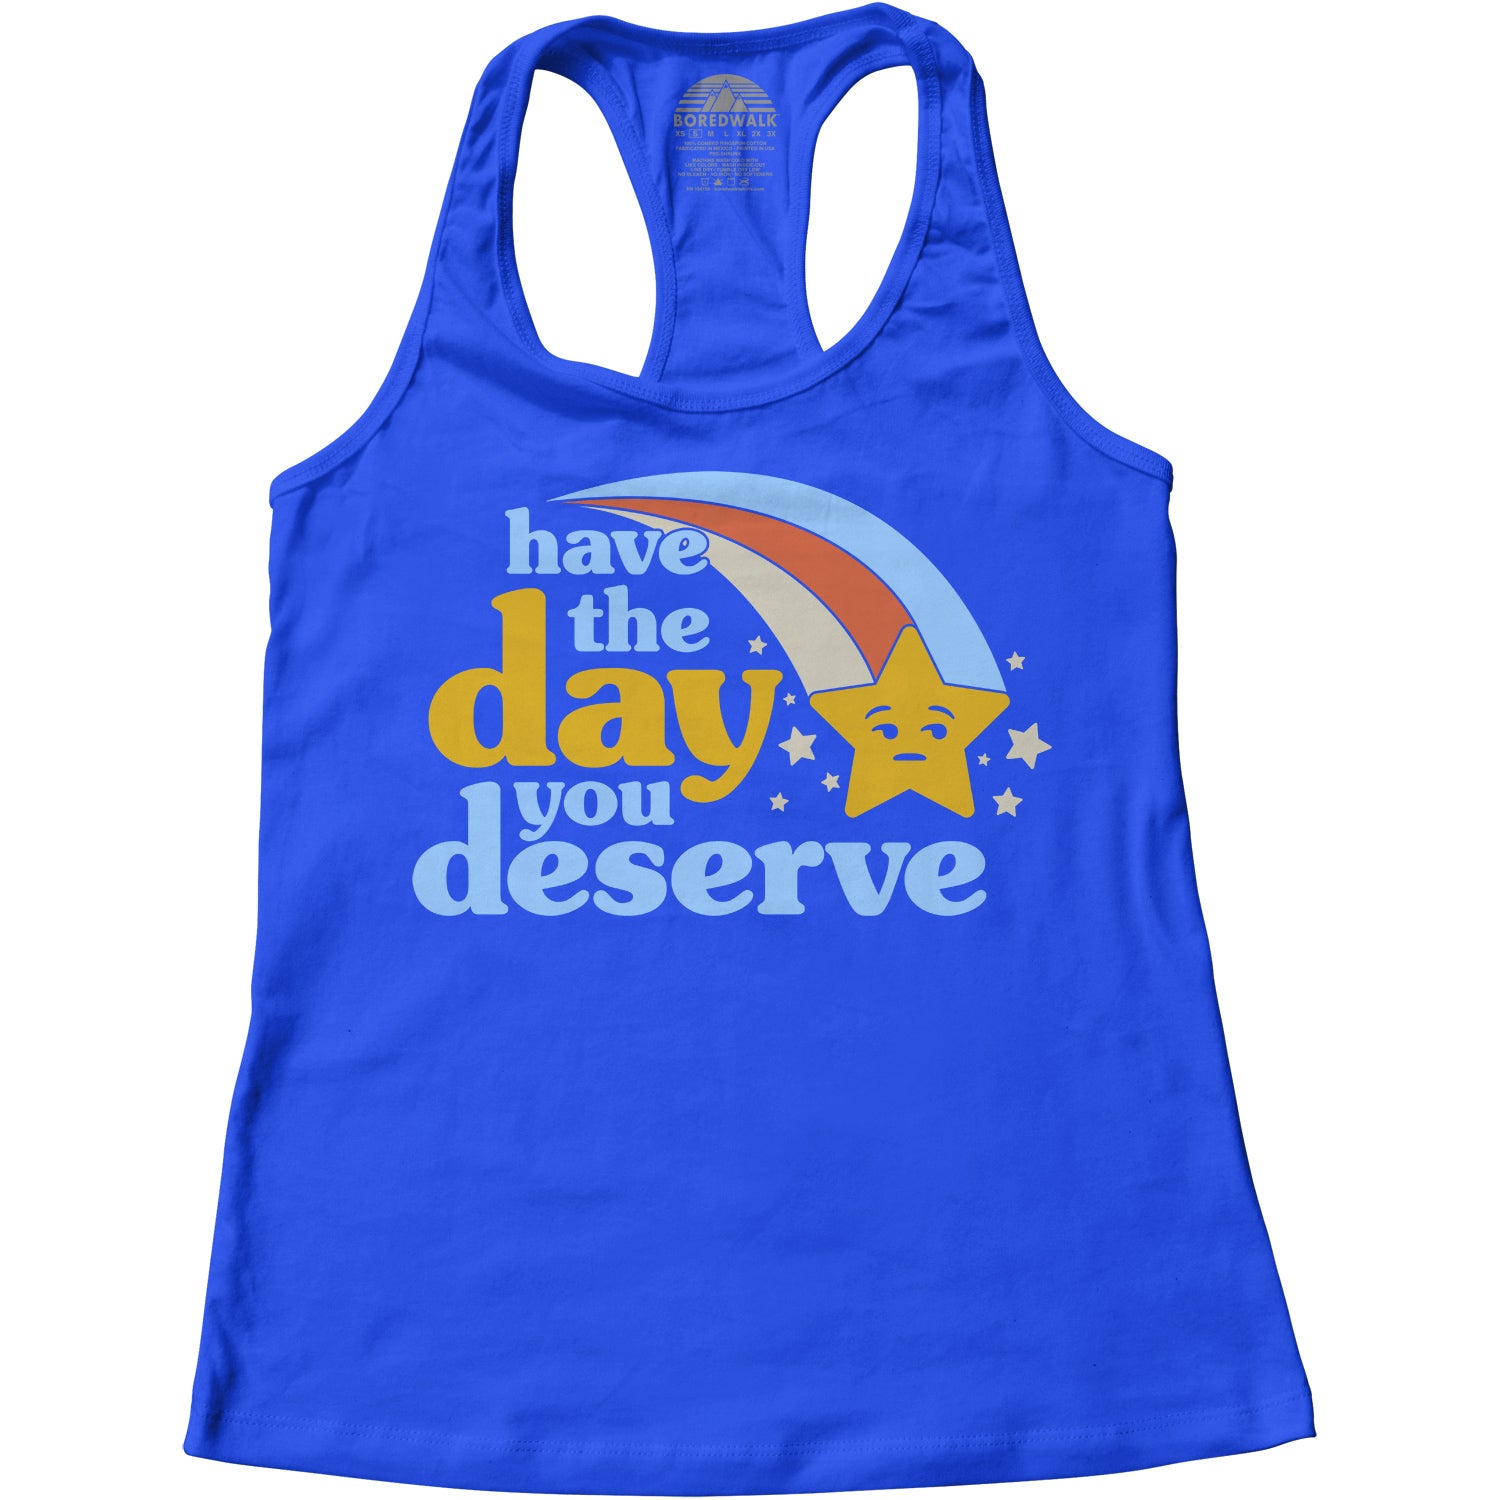 Women's Have The Day You Deserve Racerback Tank Top